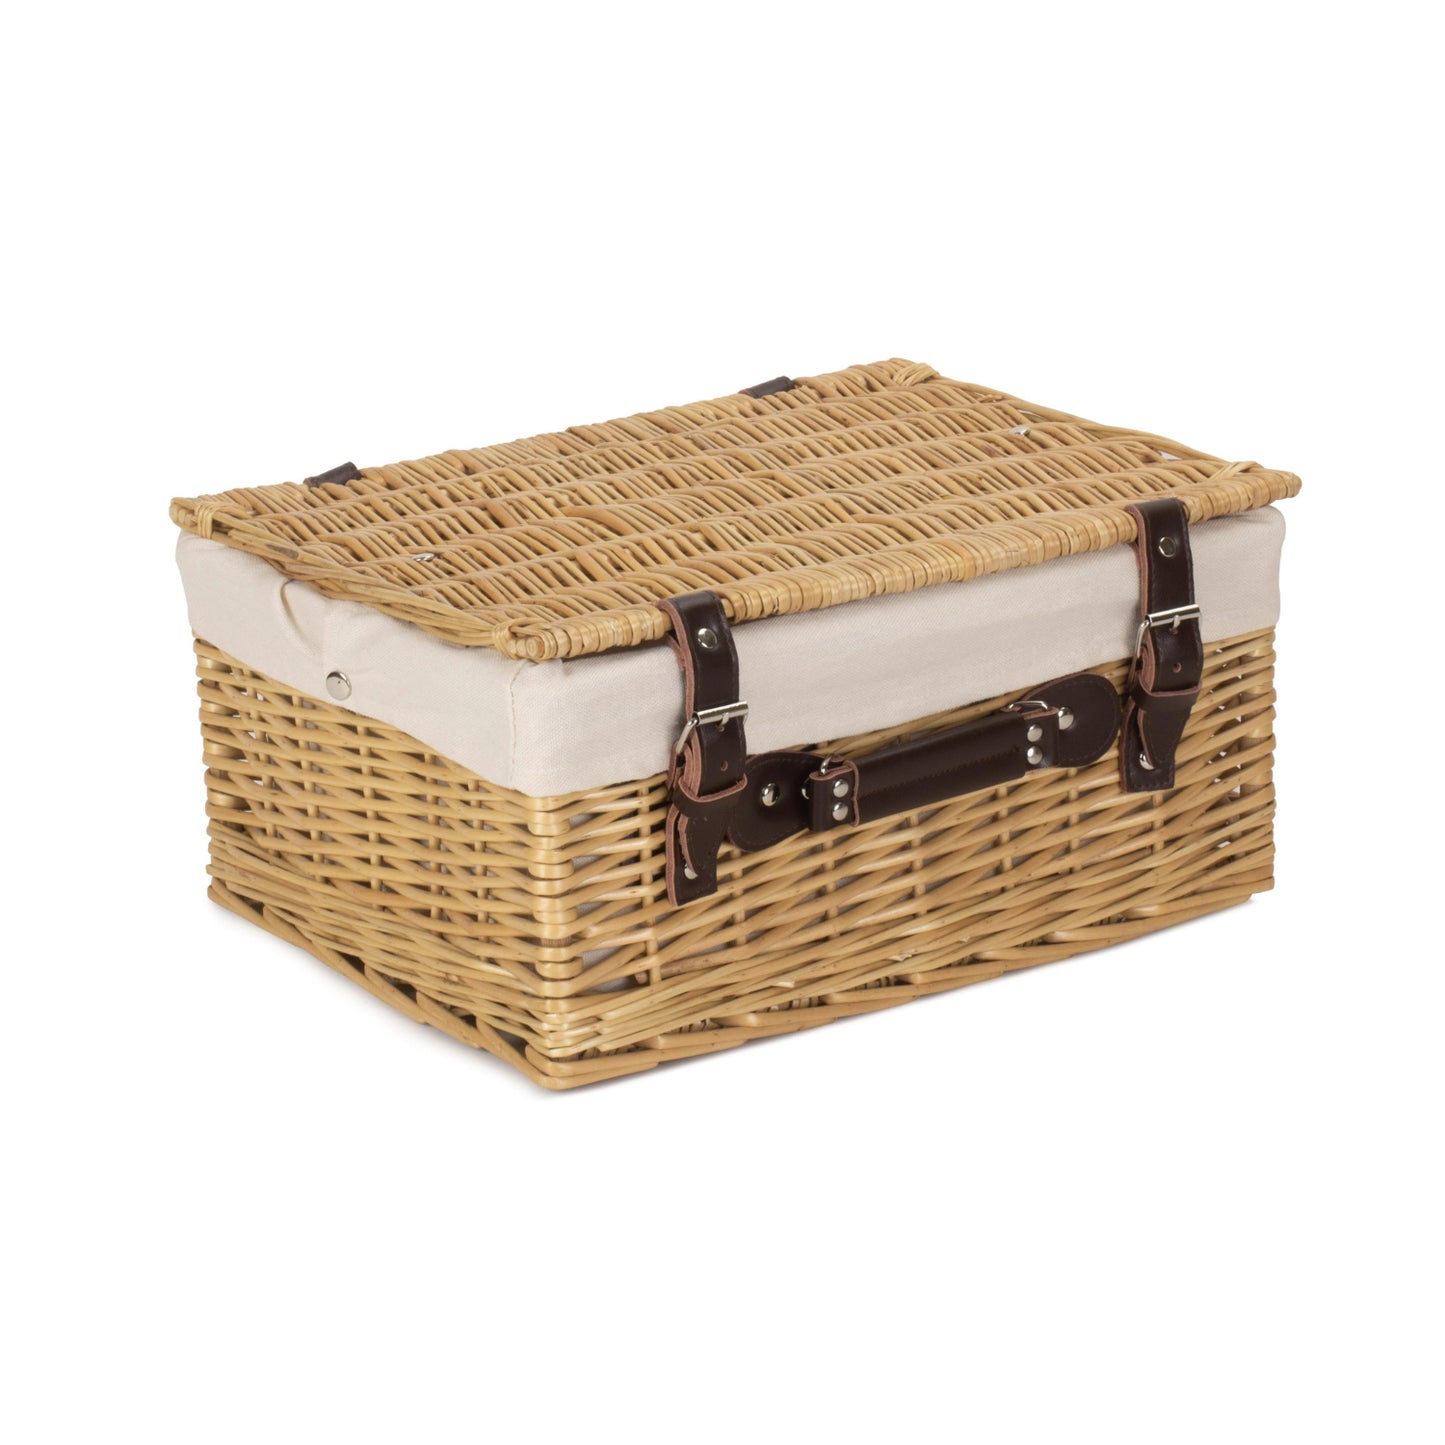 16 Inch Buff Hamper With White Lining